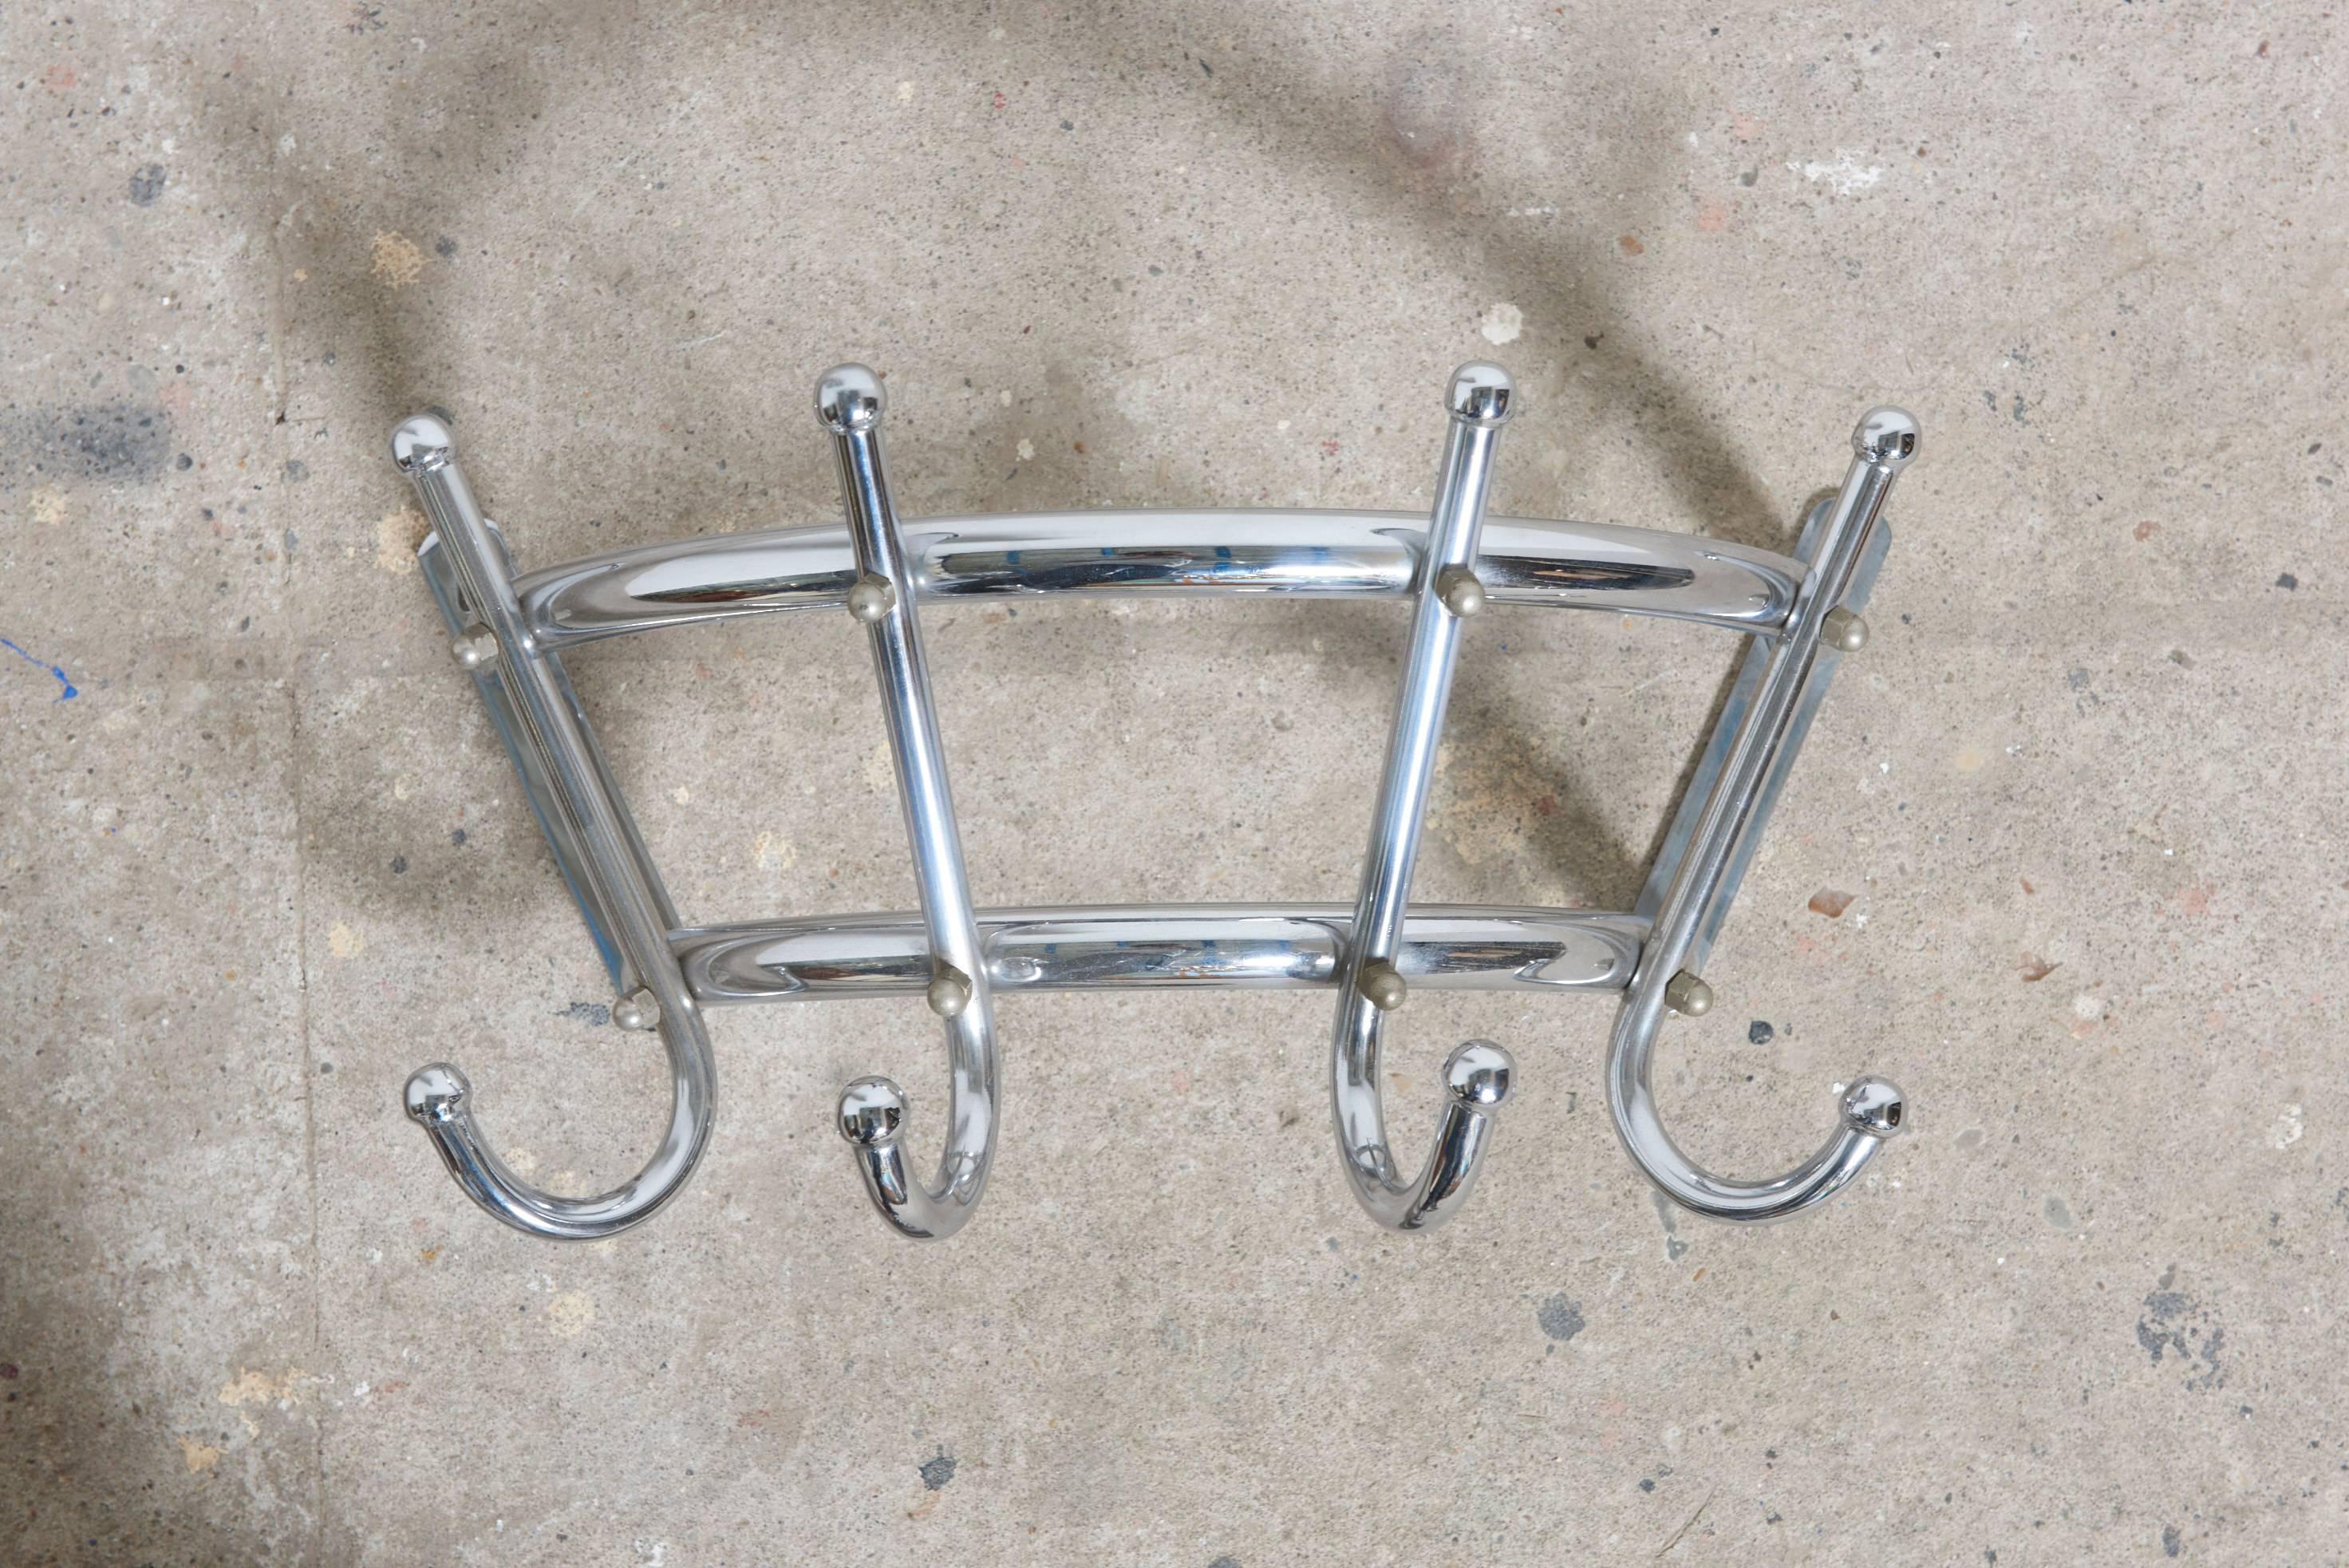 Vintage chrome half round wall hanging coat rack with four chrome hooks.
Perfect for small homes when everything’s in harmony and organized, even the tiniest space can feel expansive and refreshingly Minimalist.